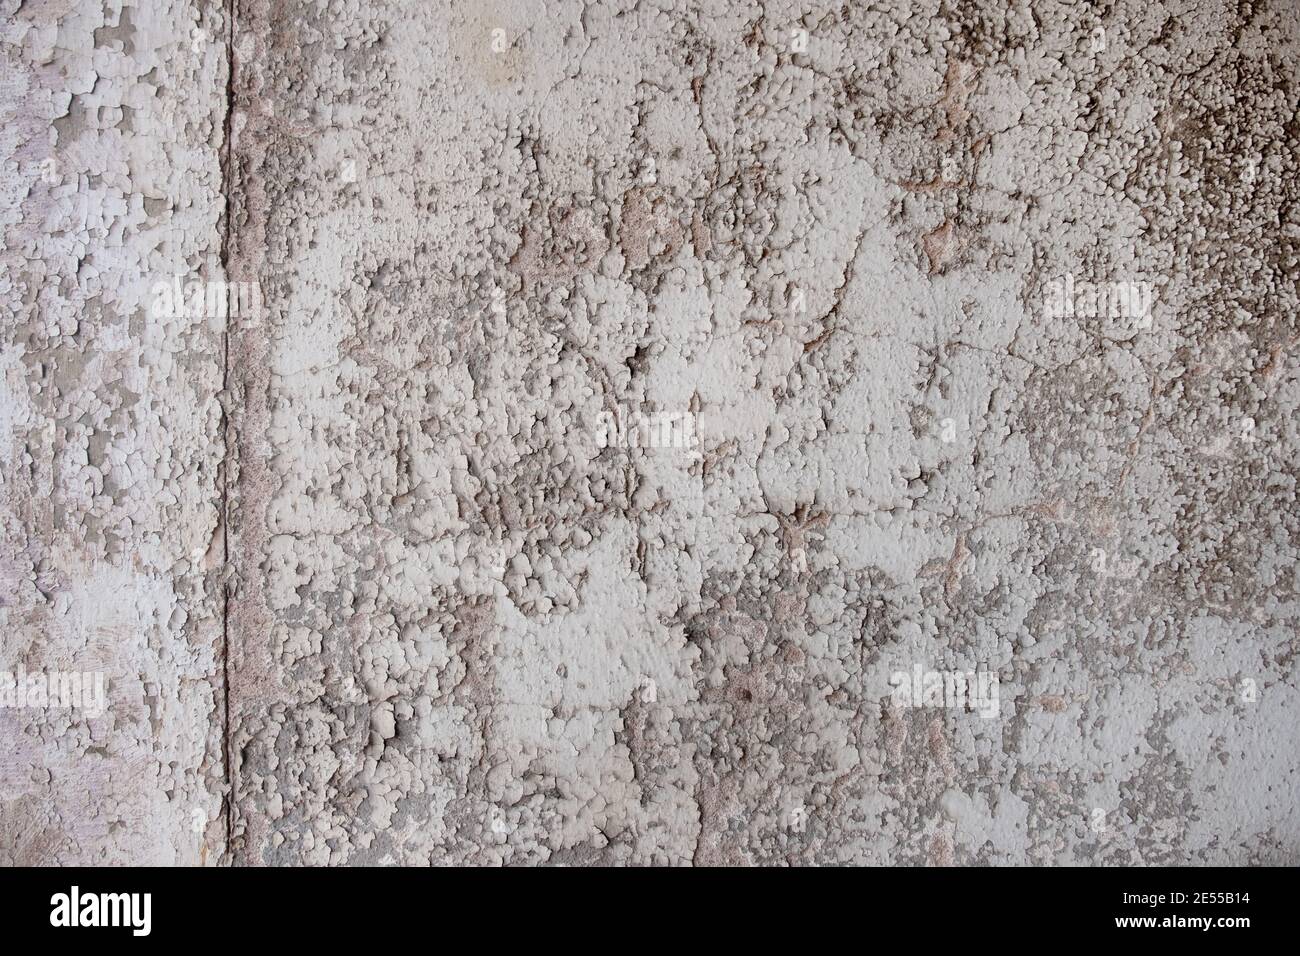 Texture with old, used, cracked painting, paint gray monochrome peeled off. Grunge color results in a free abstract pattern background texture Stock Photo